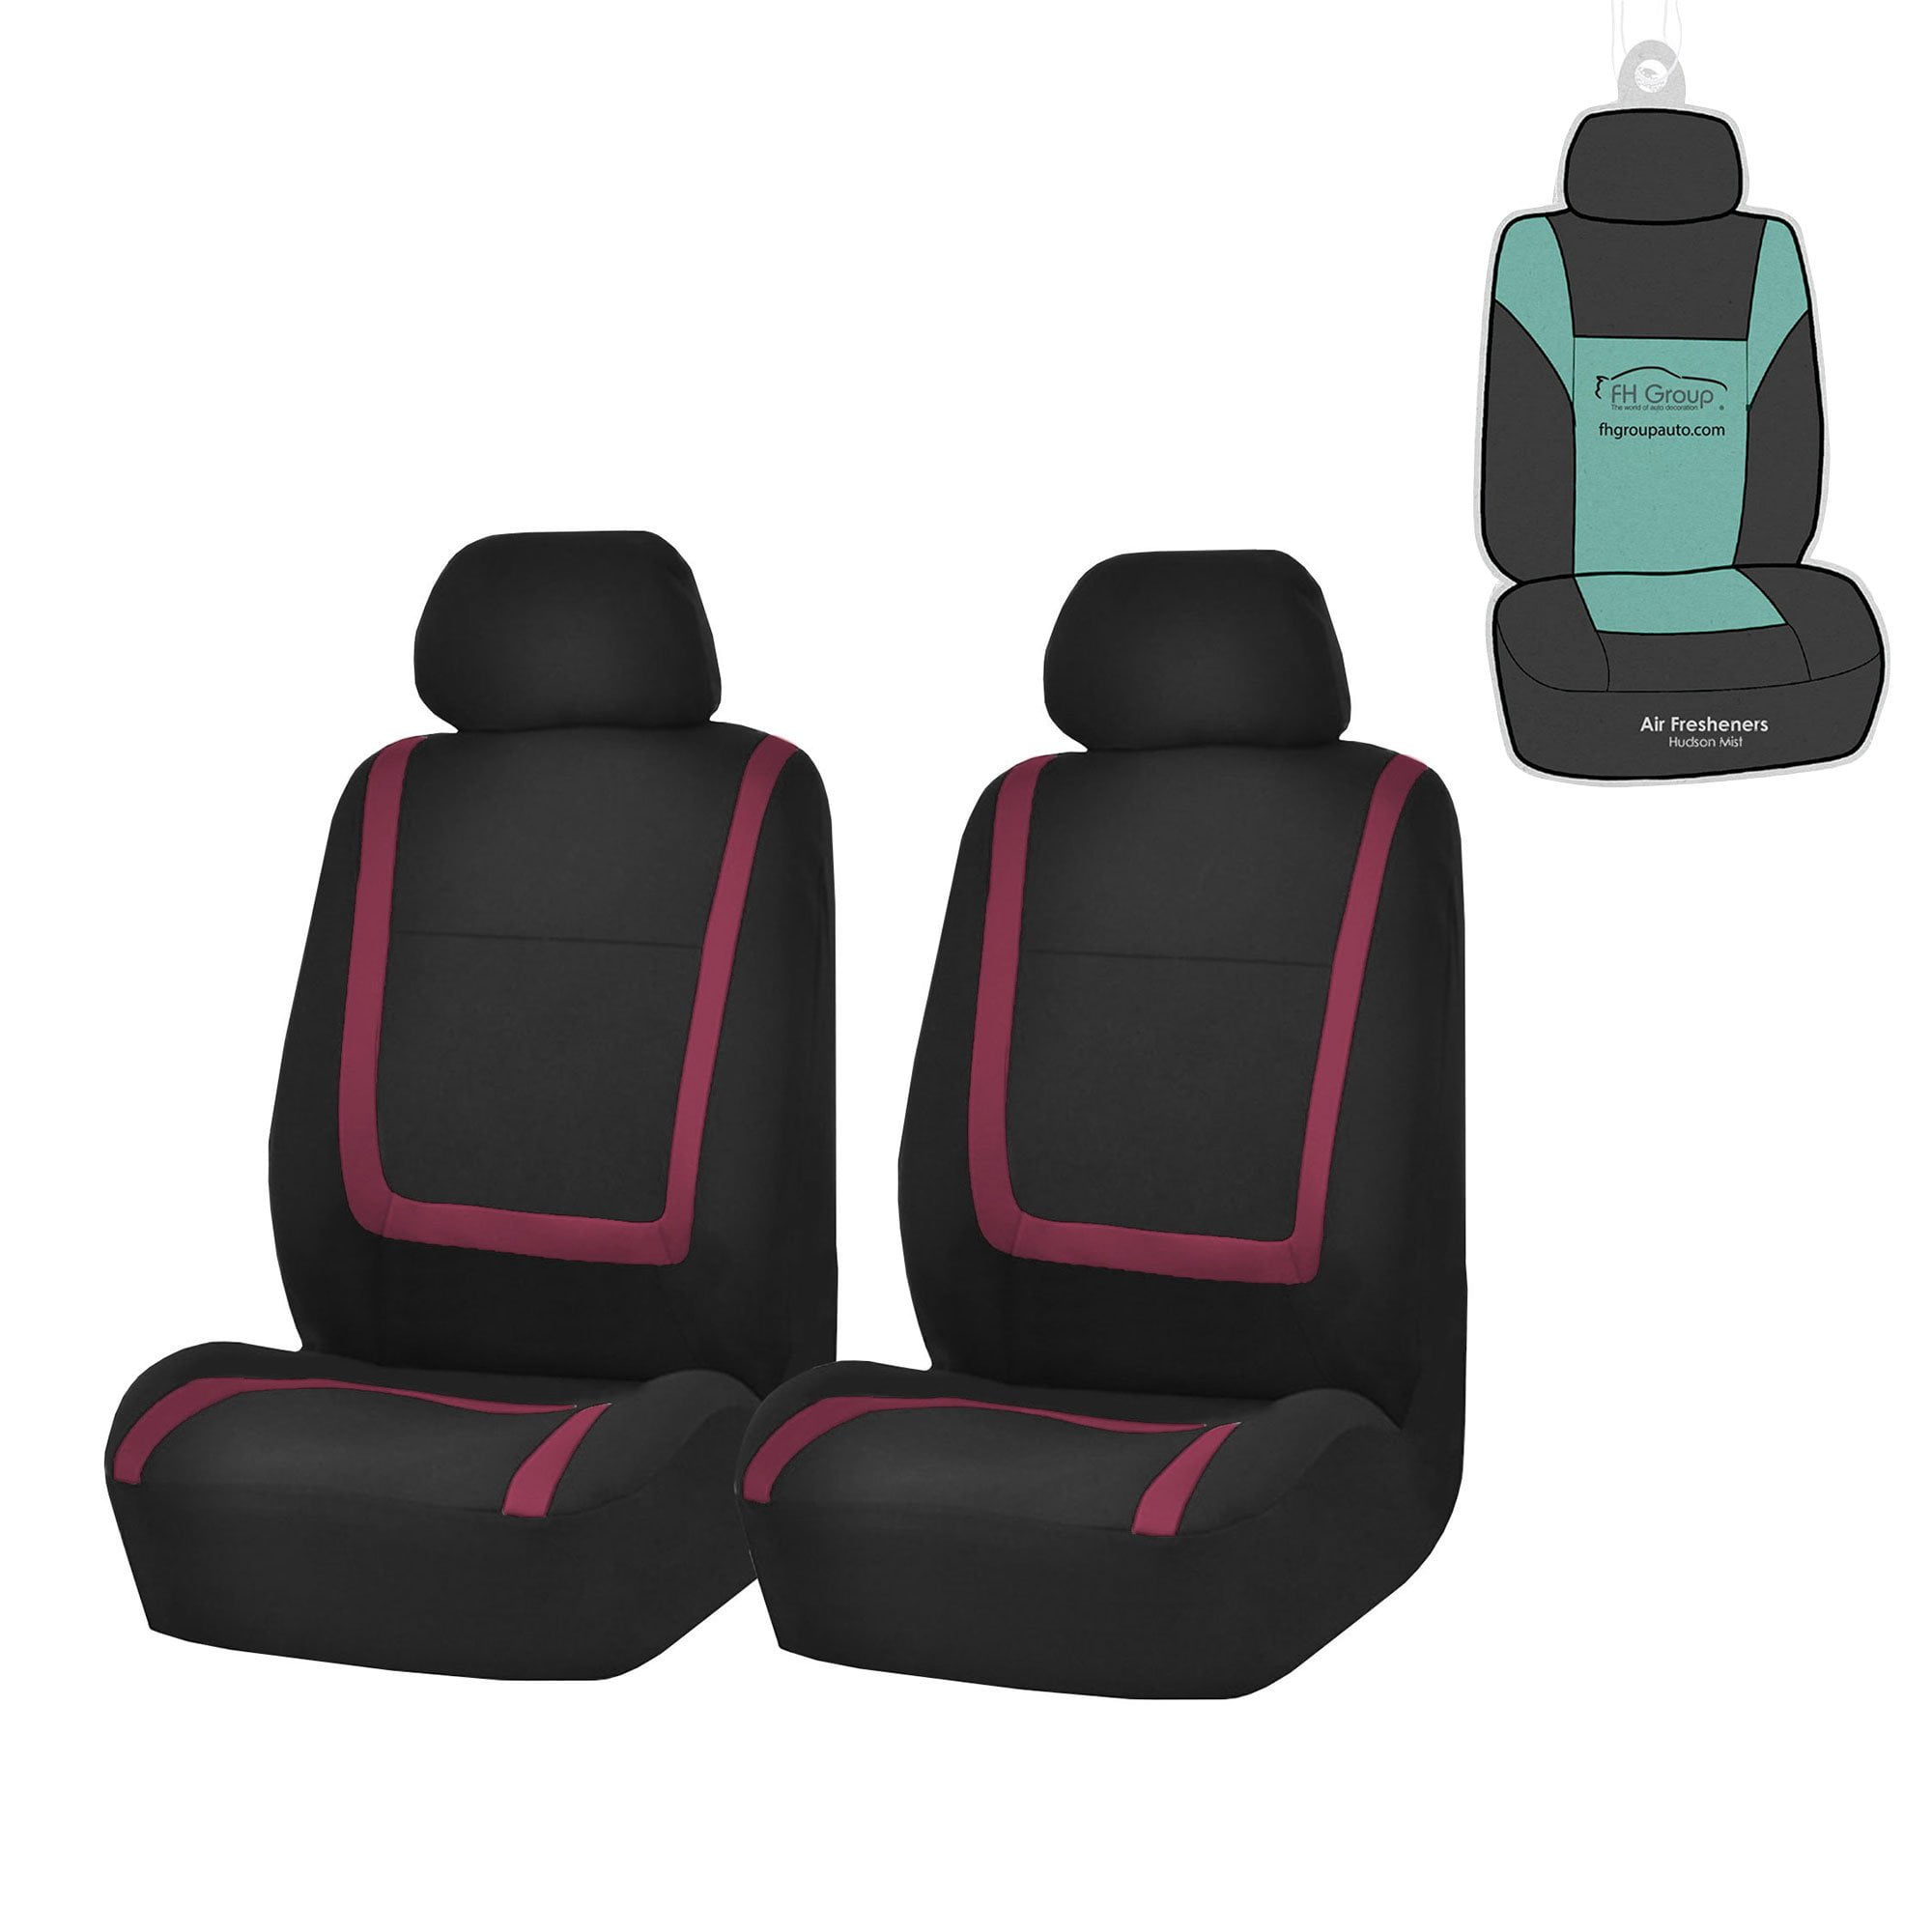 FH Group Automotive Seat Covers - Full Set Universal Fit - Gray Flat Cloth  - Car Truck SUV Interior Accessories